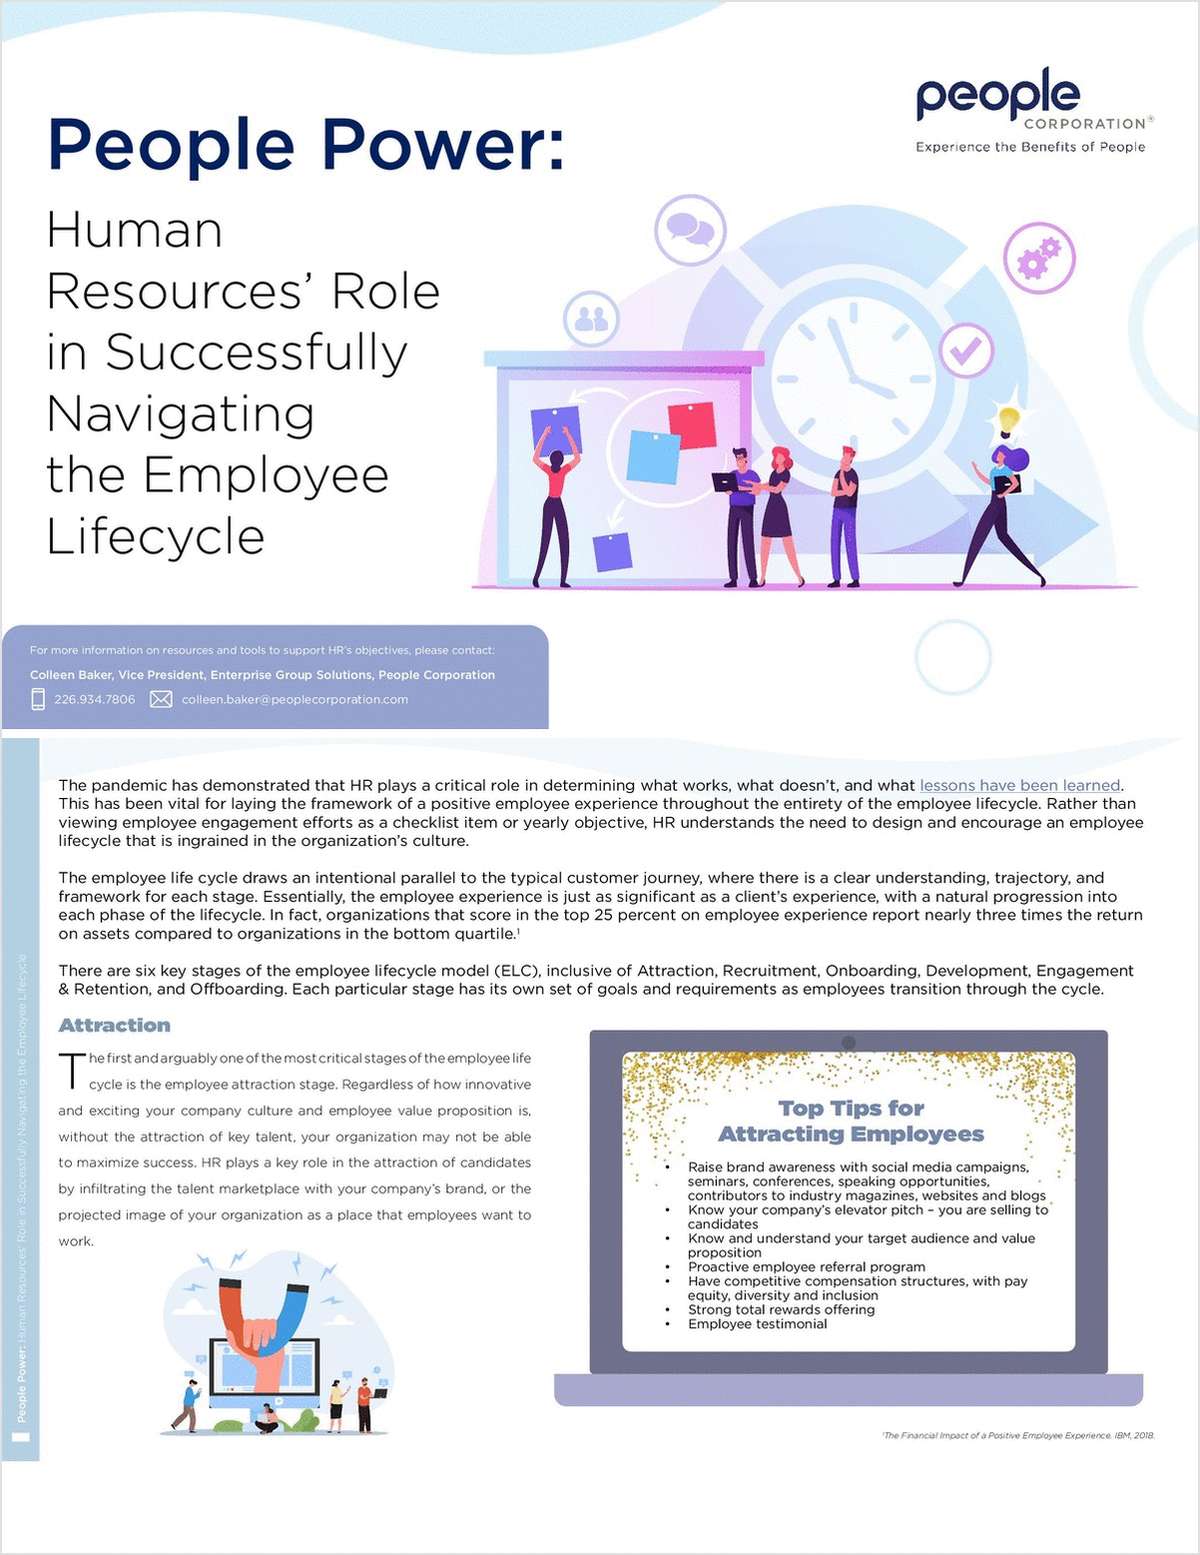 People Power: Human Resources' Role in Successfully Navigating the Employee Lifecycle